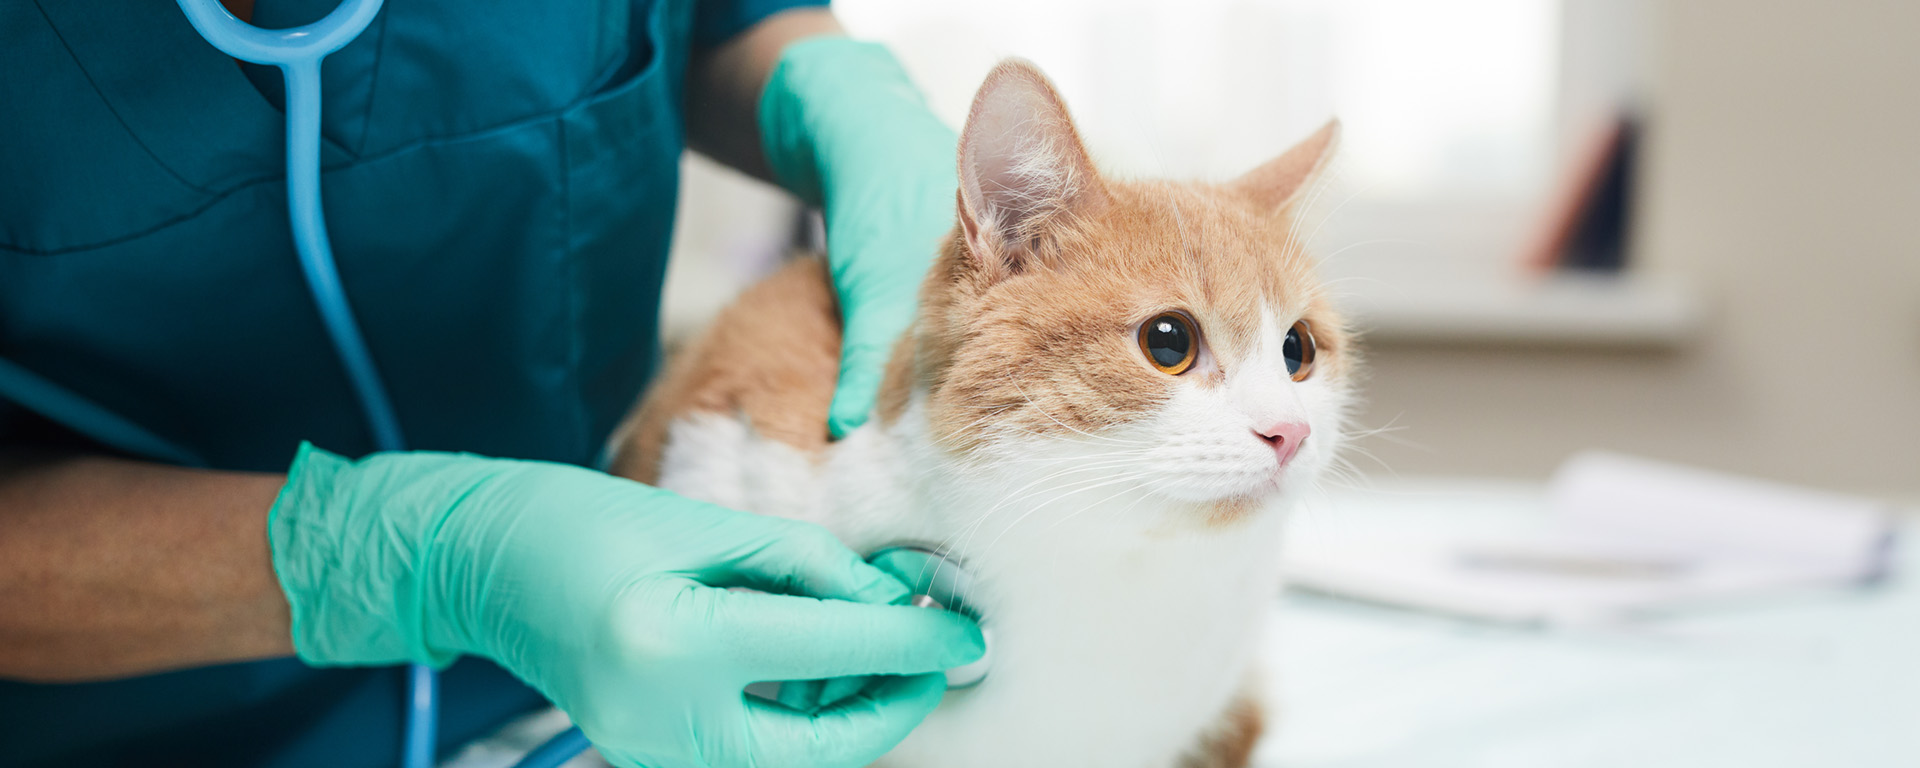 A small cat being examined at the vet 